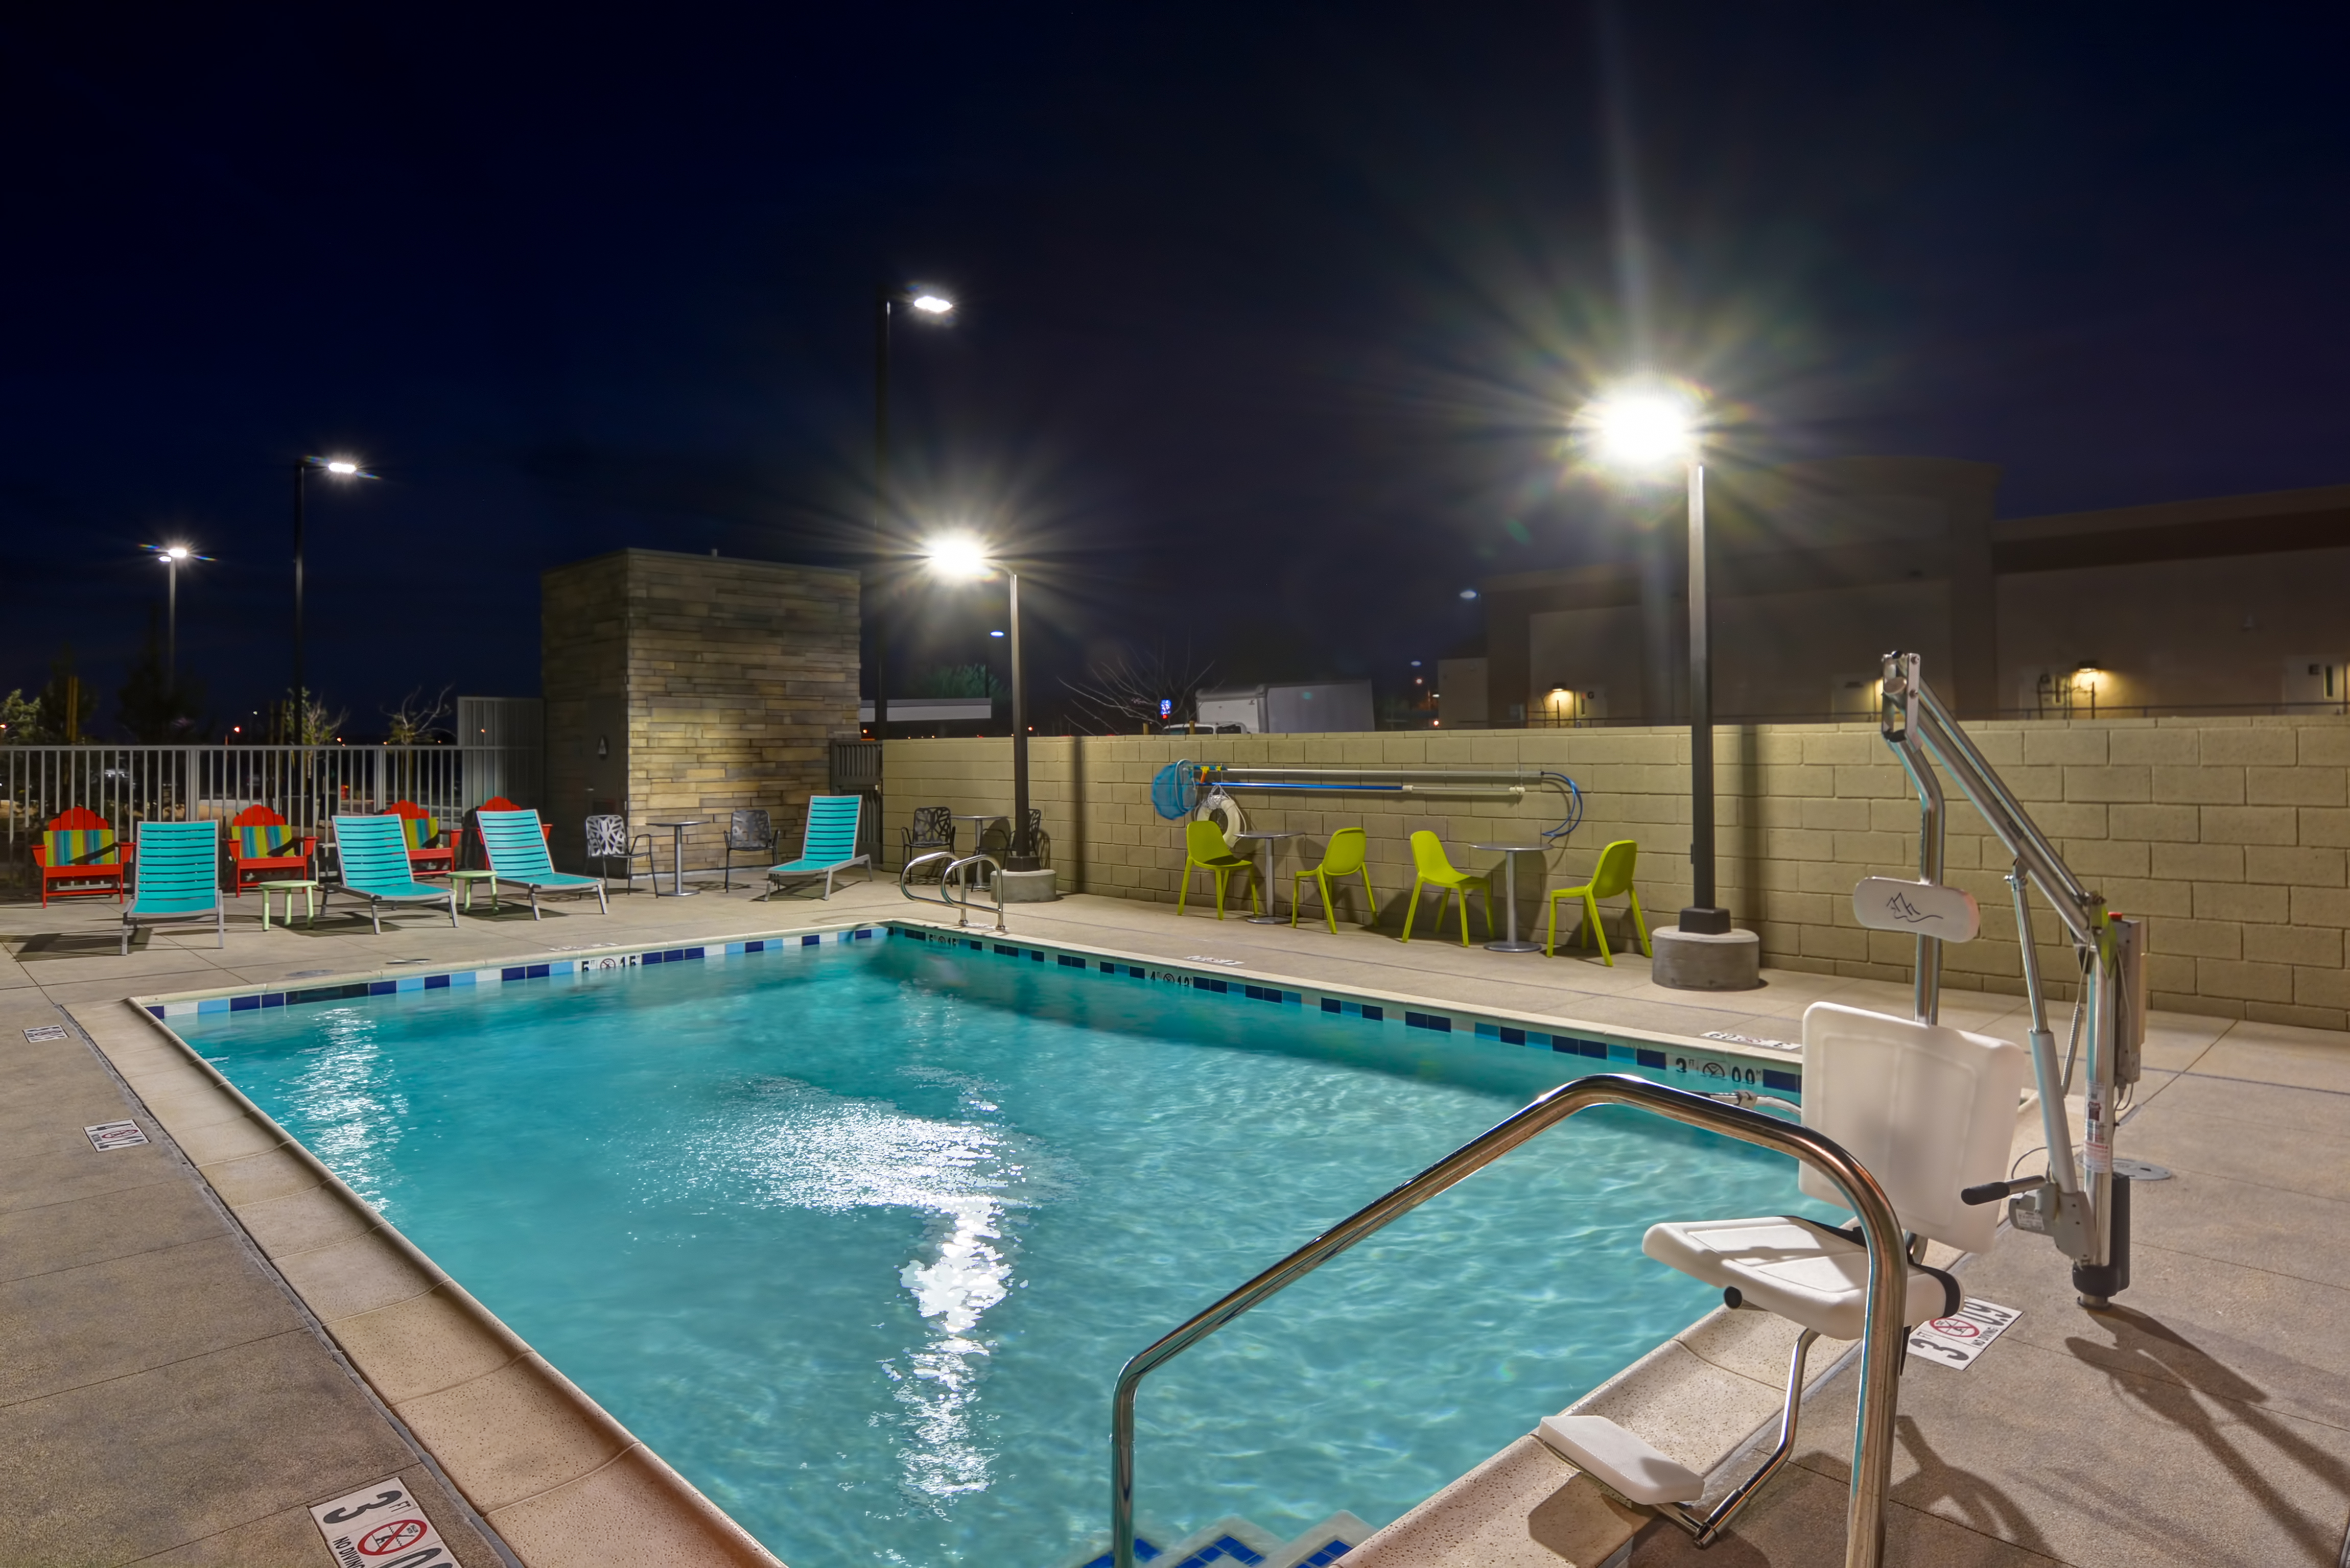 Outdoor Pool and Lounge Chairs at Night